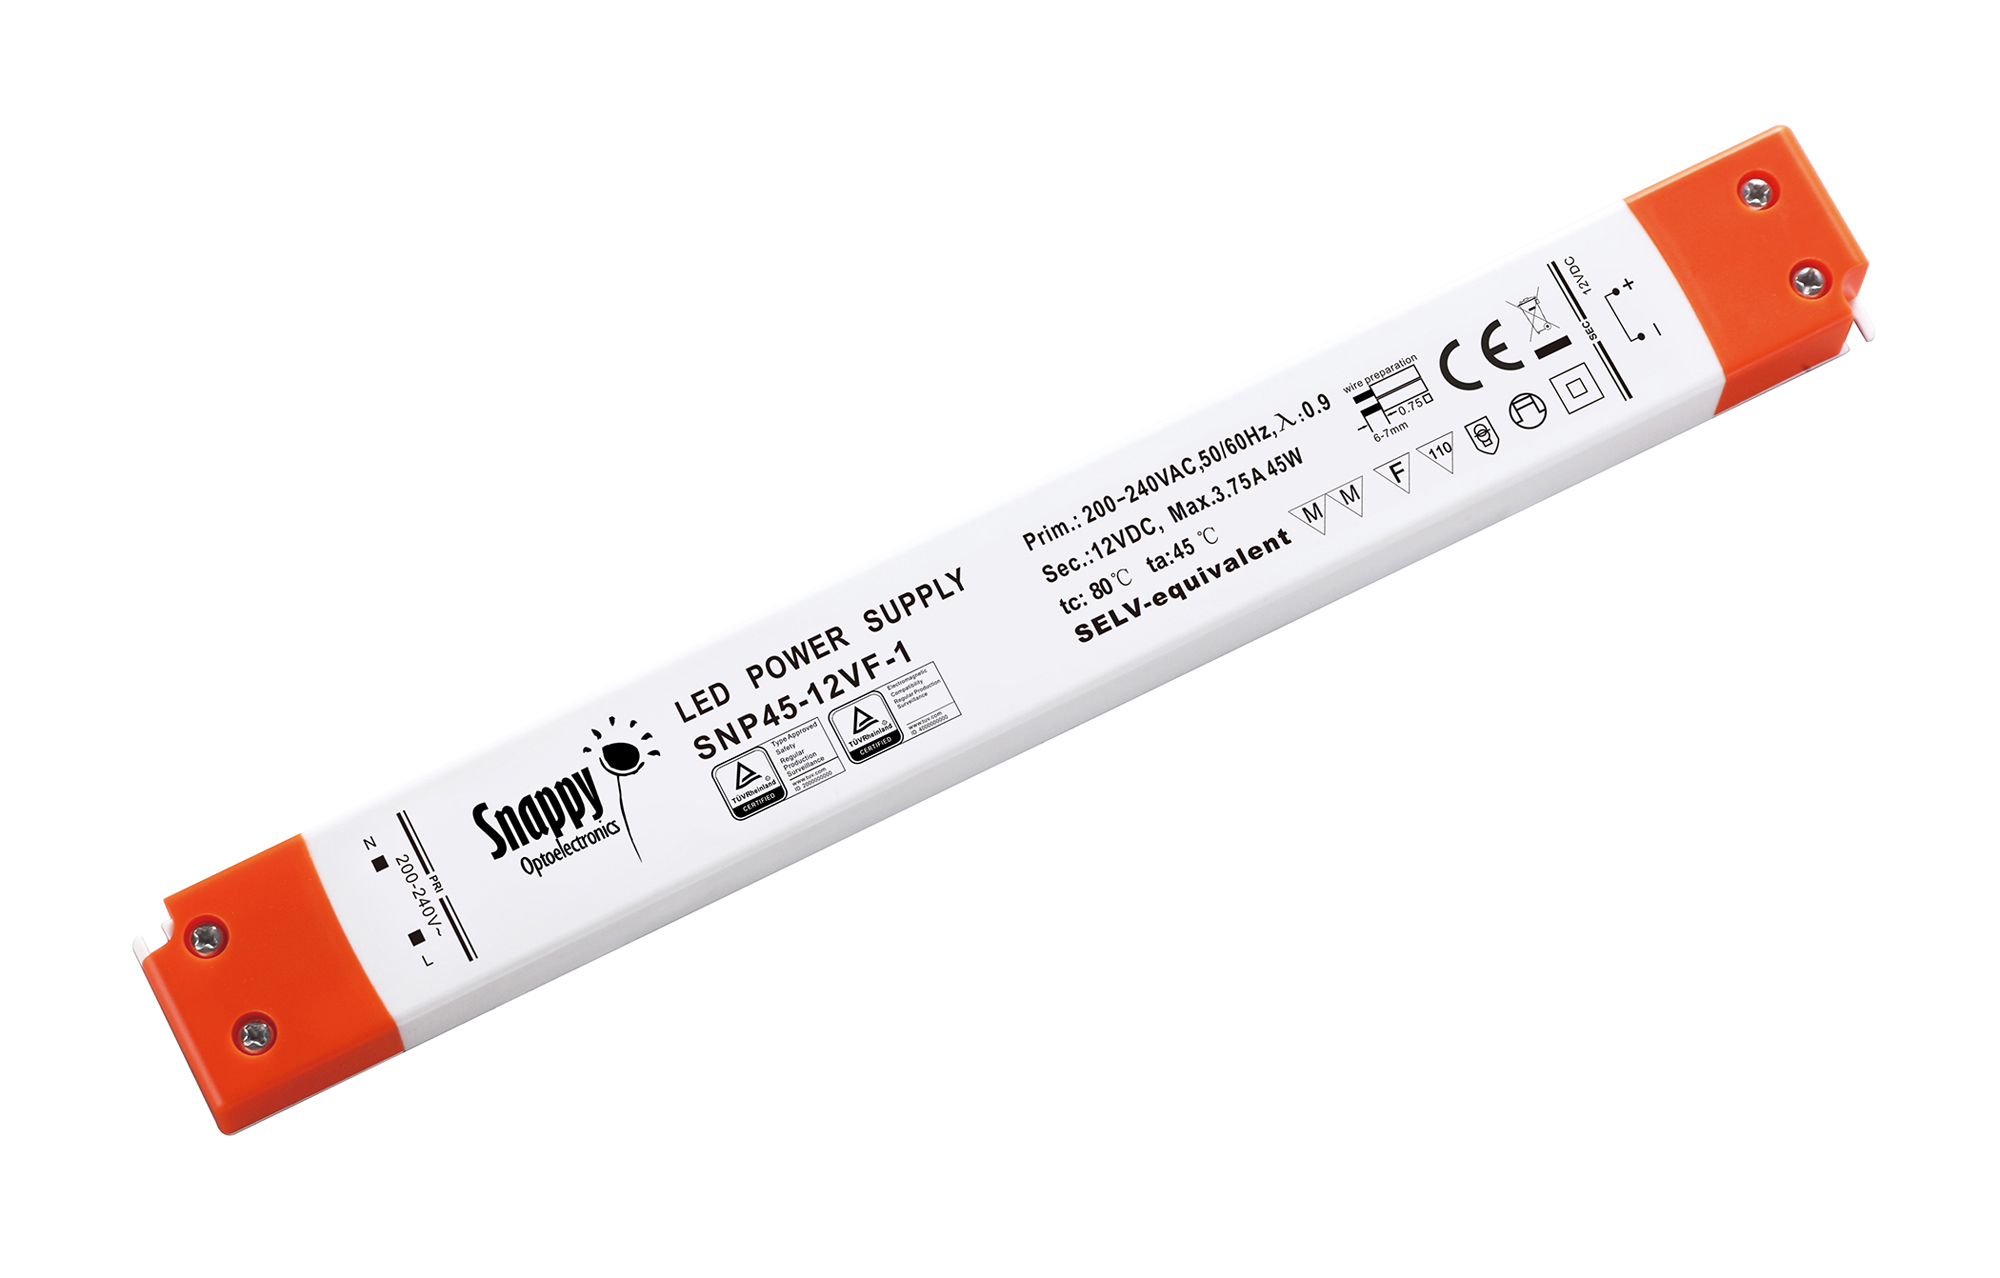 SNP45-12VF-1  45W Constant Voltage Non-Dimmable LED Driver 12VDC 3.75A IP20